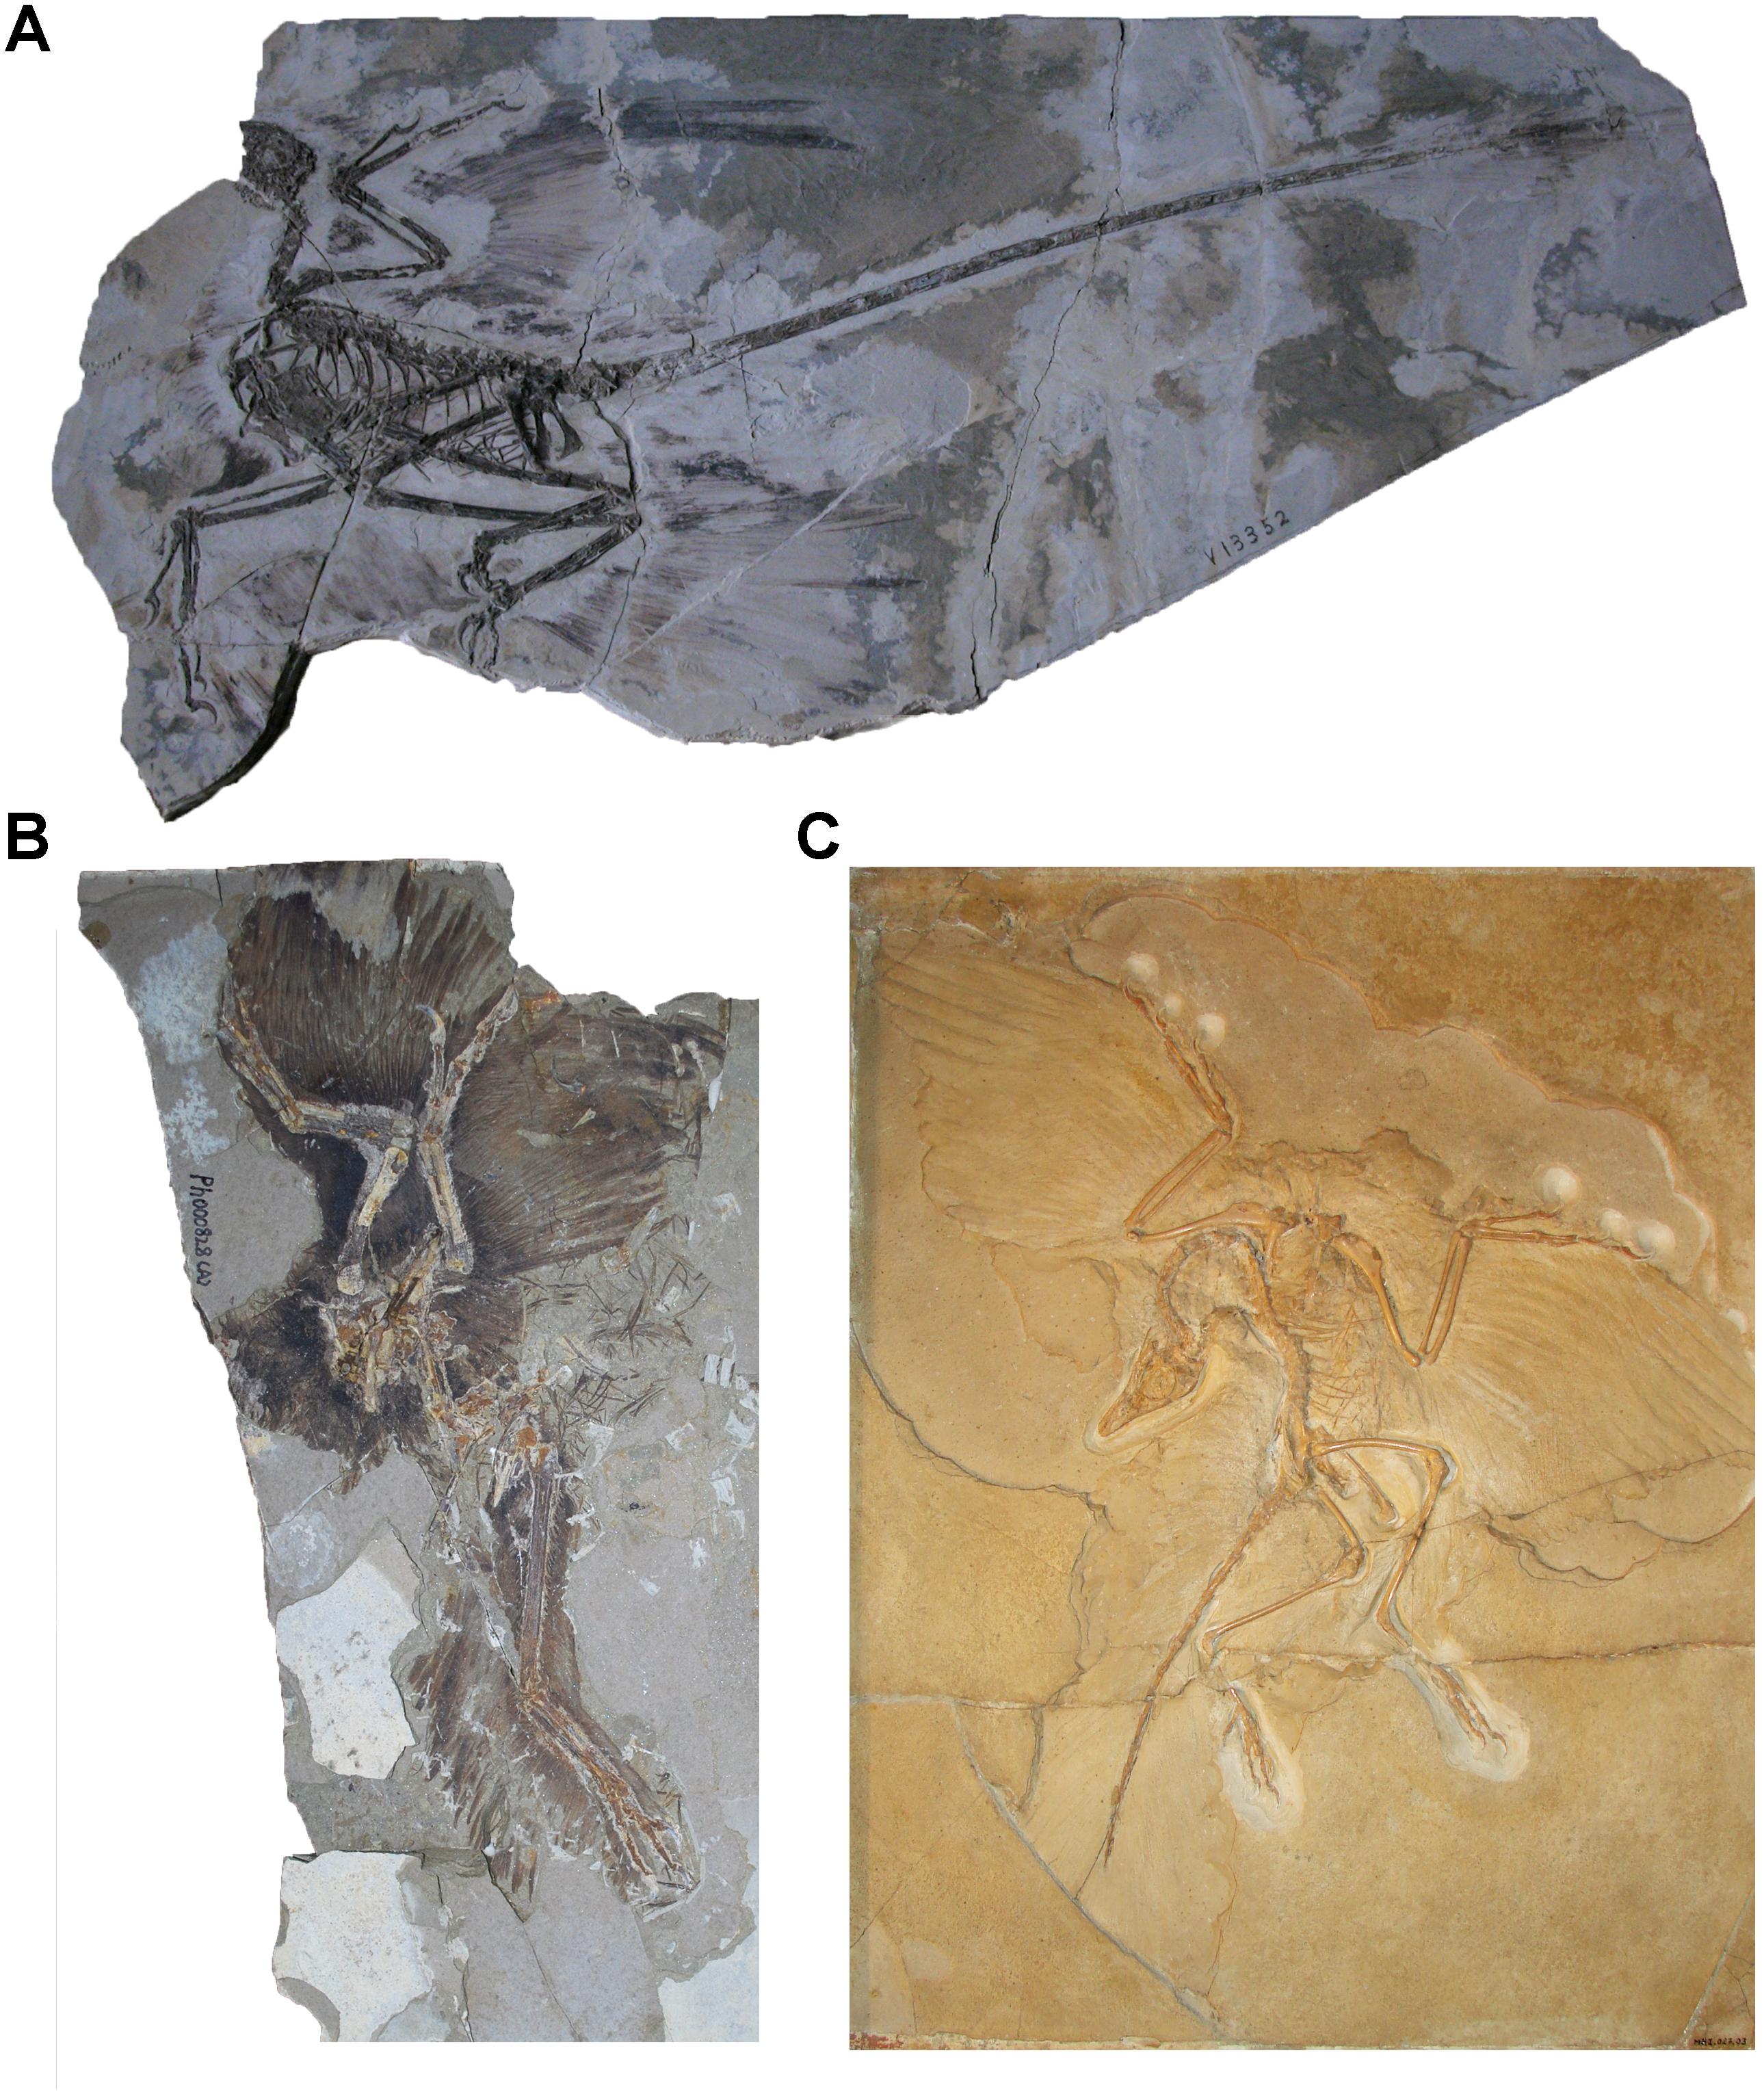 Frontiers Paravian Phylogeny And The Dinosaur Bird Transition